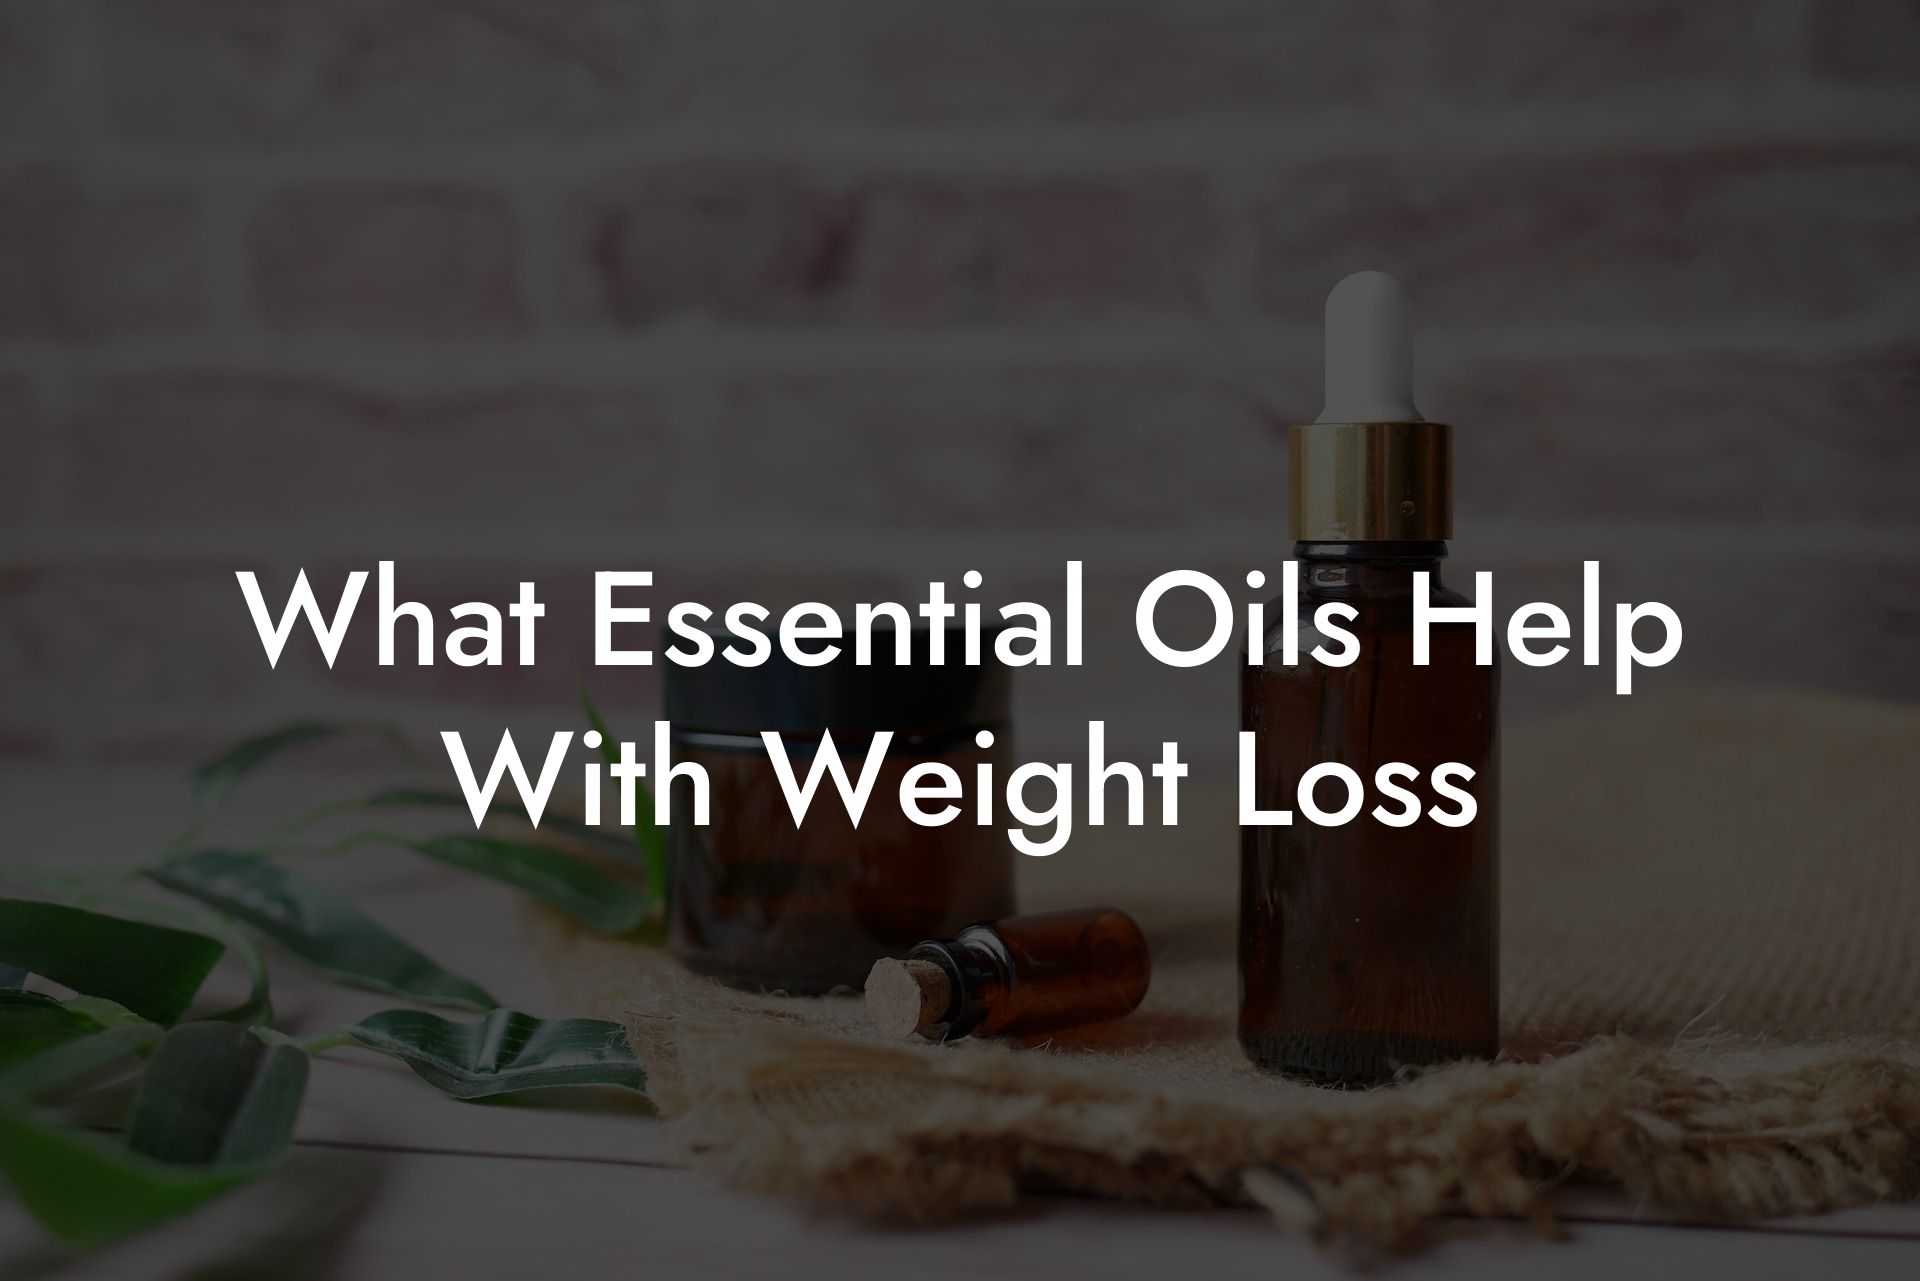 What Essential Oils Help With Weight Loss